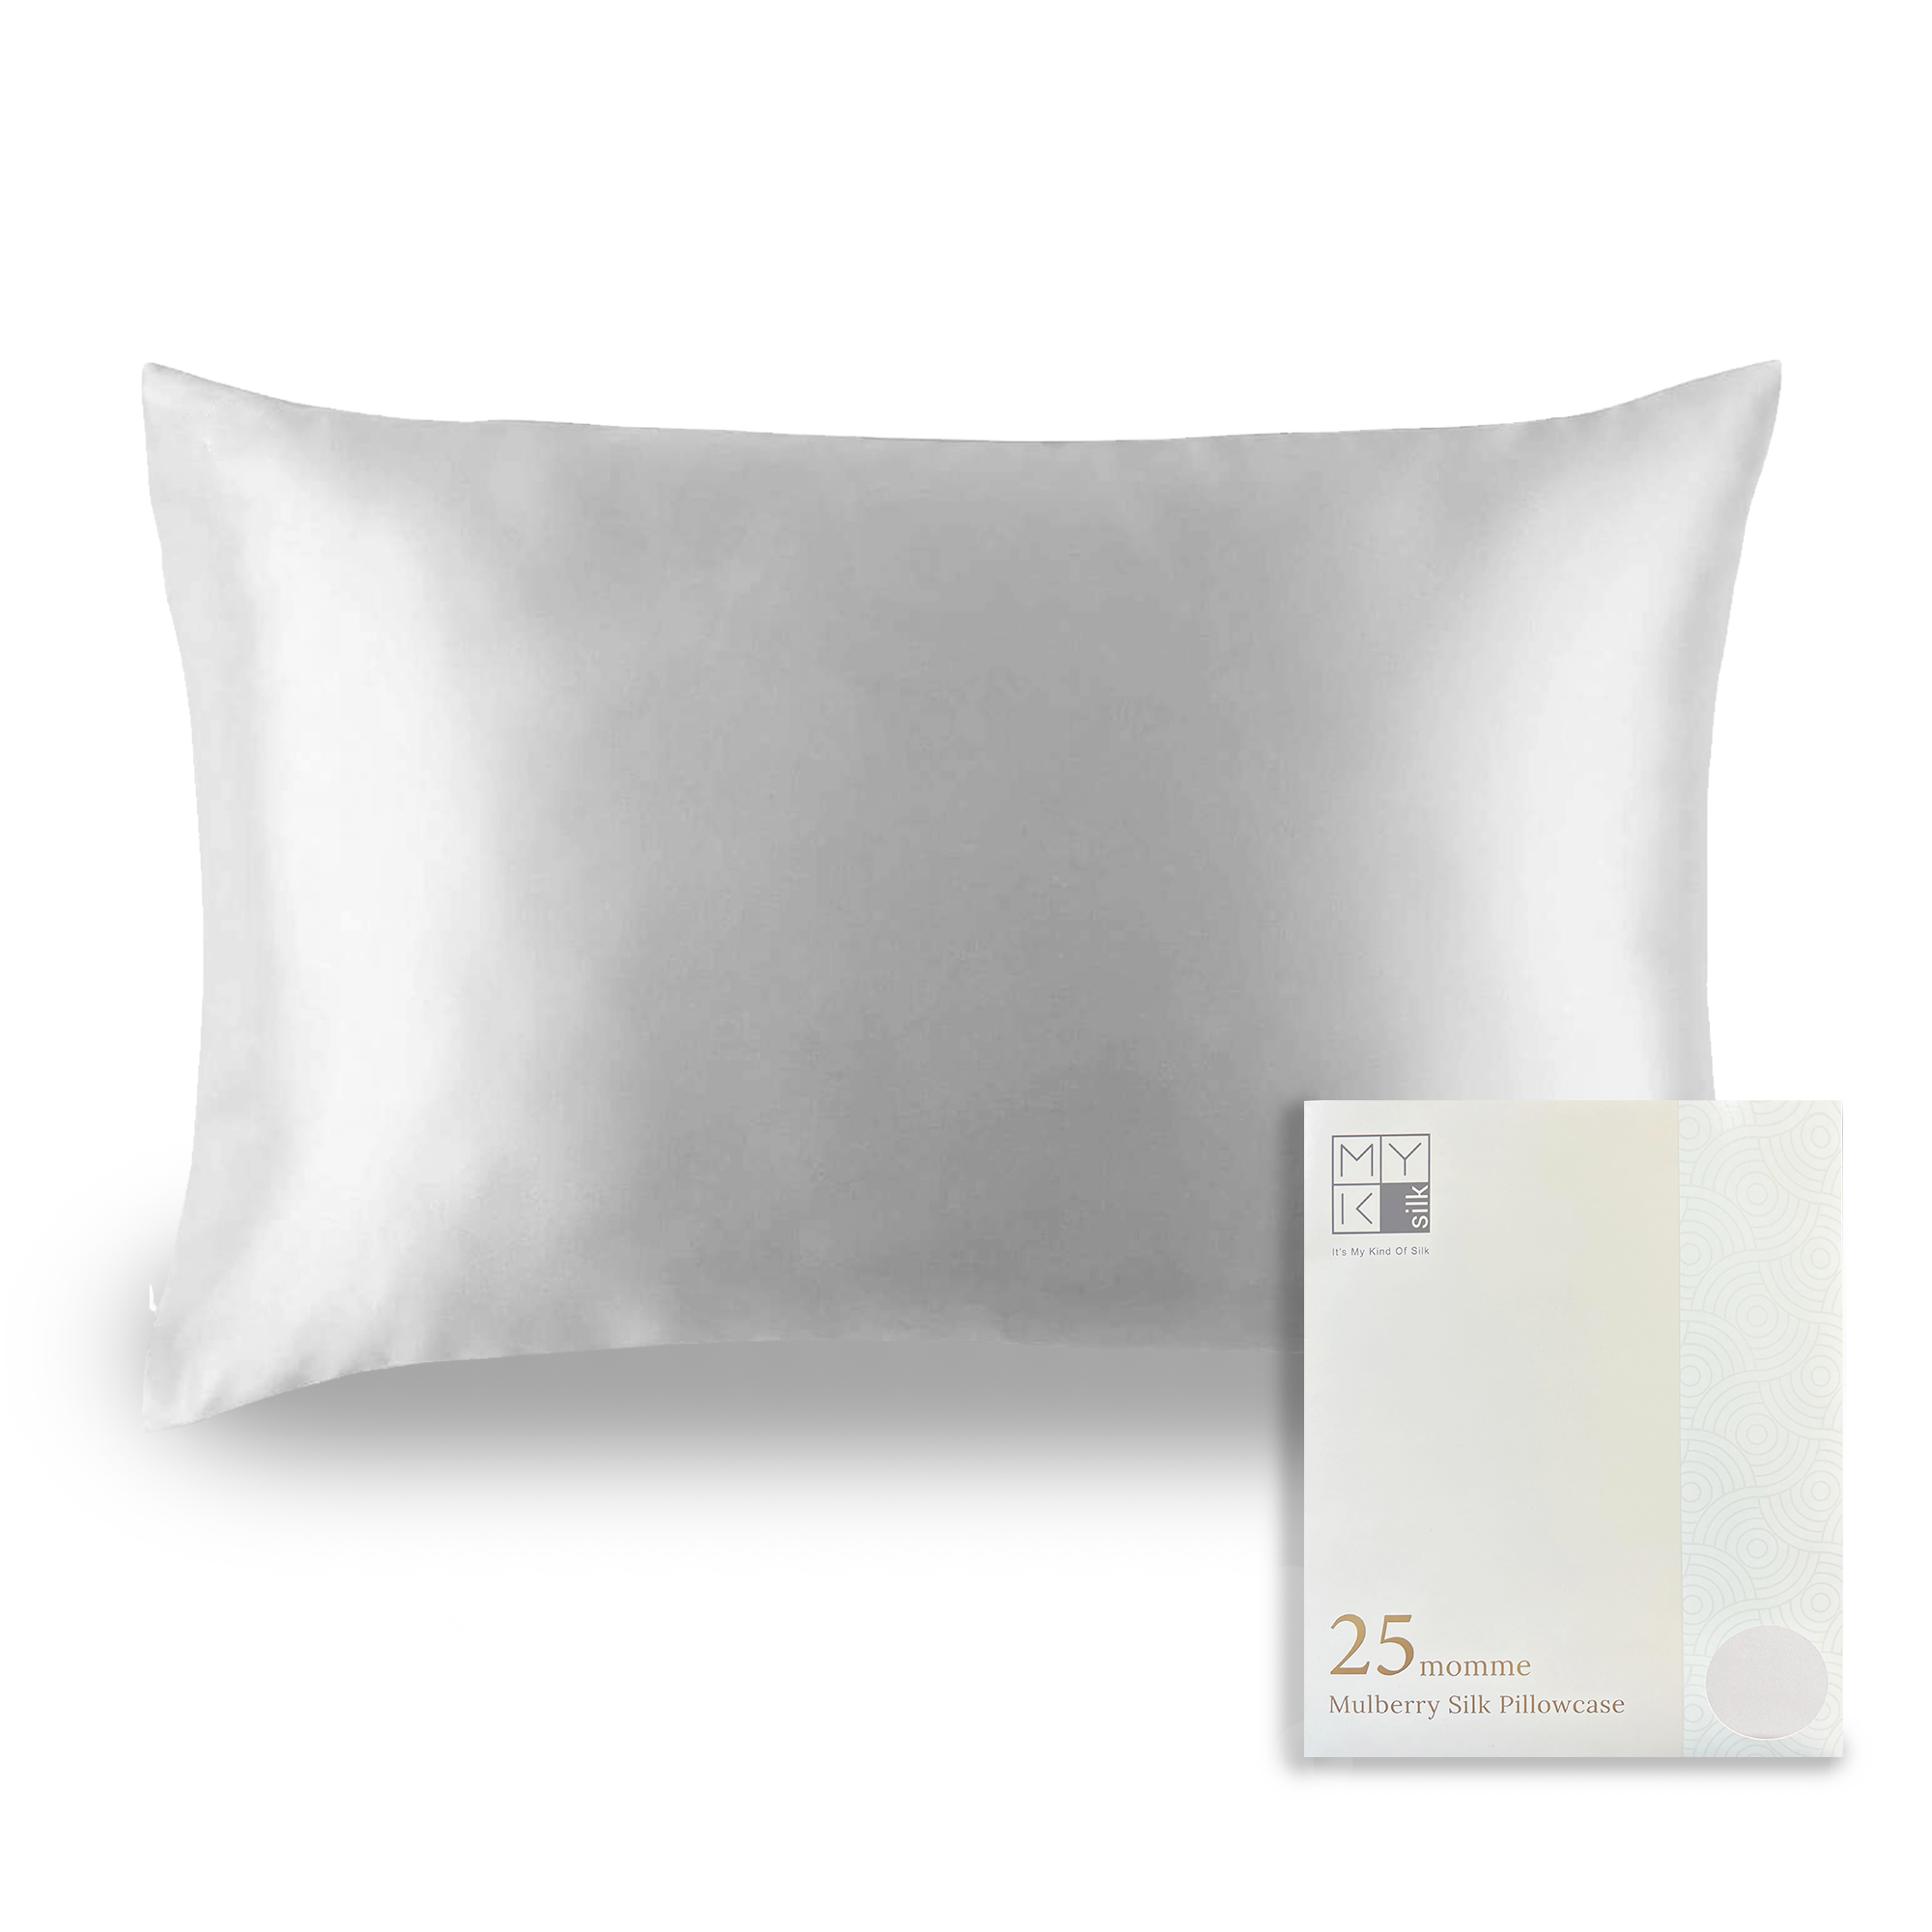 Products Luxury Mulberry Silk Pillowcase (25 momme) - MYK Silk #color_french grey